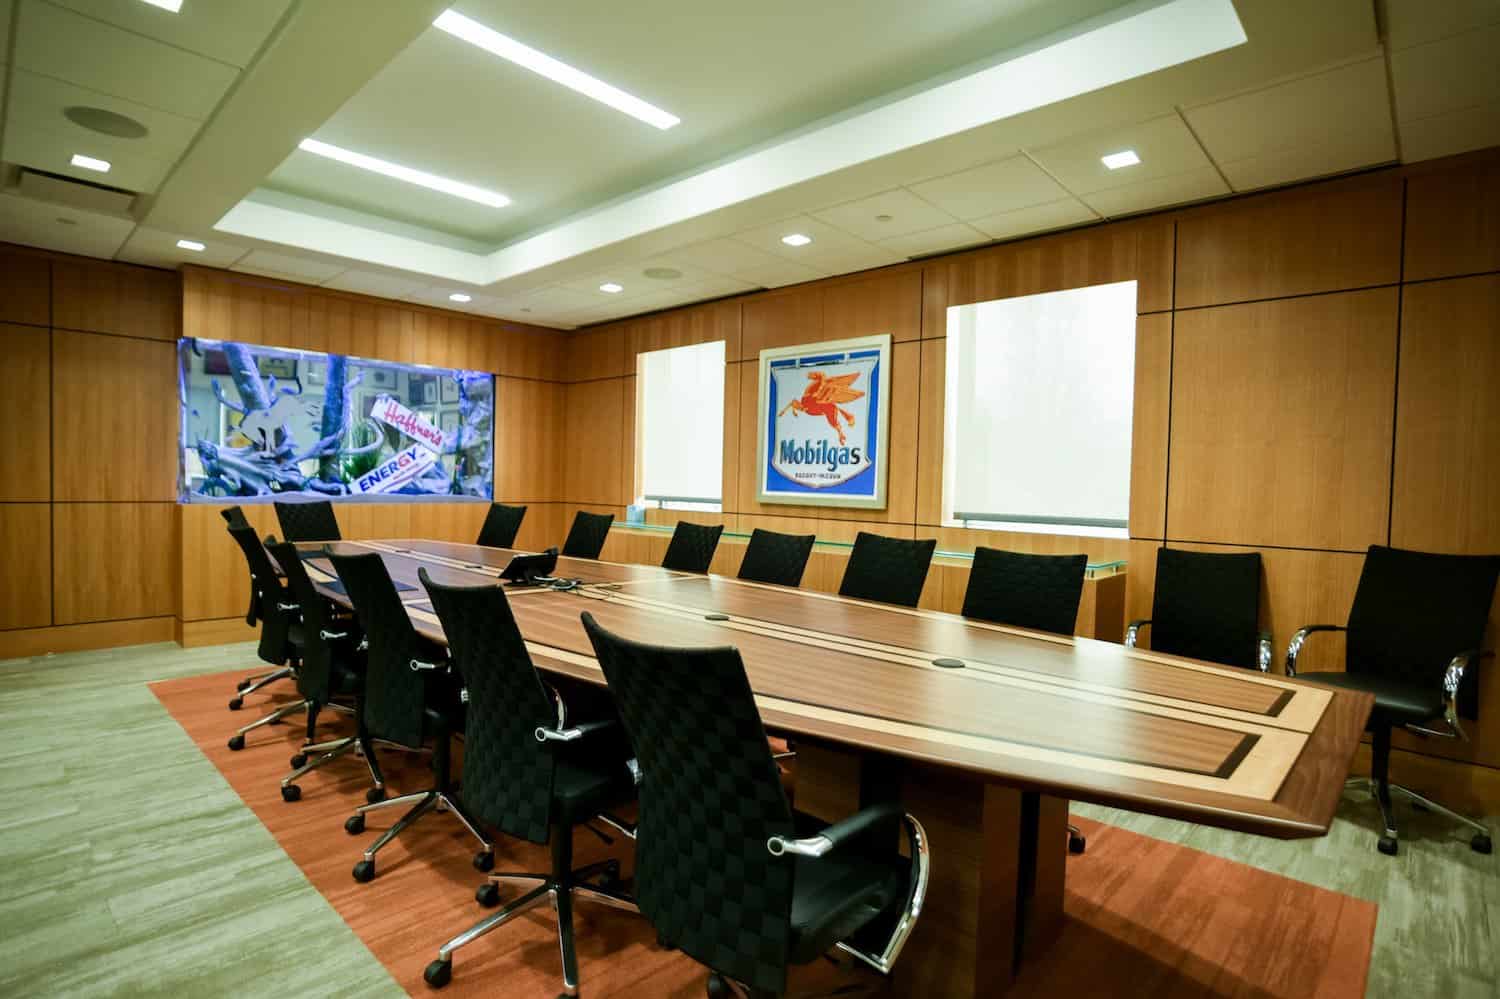 8 Conference Room Design Ideas Trends For 2020